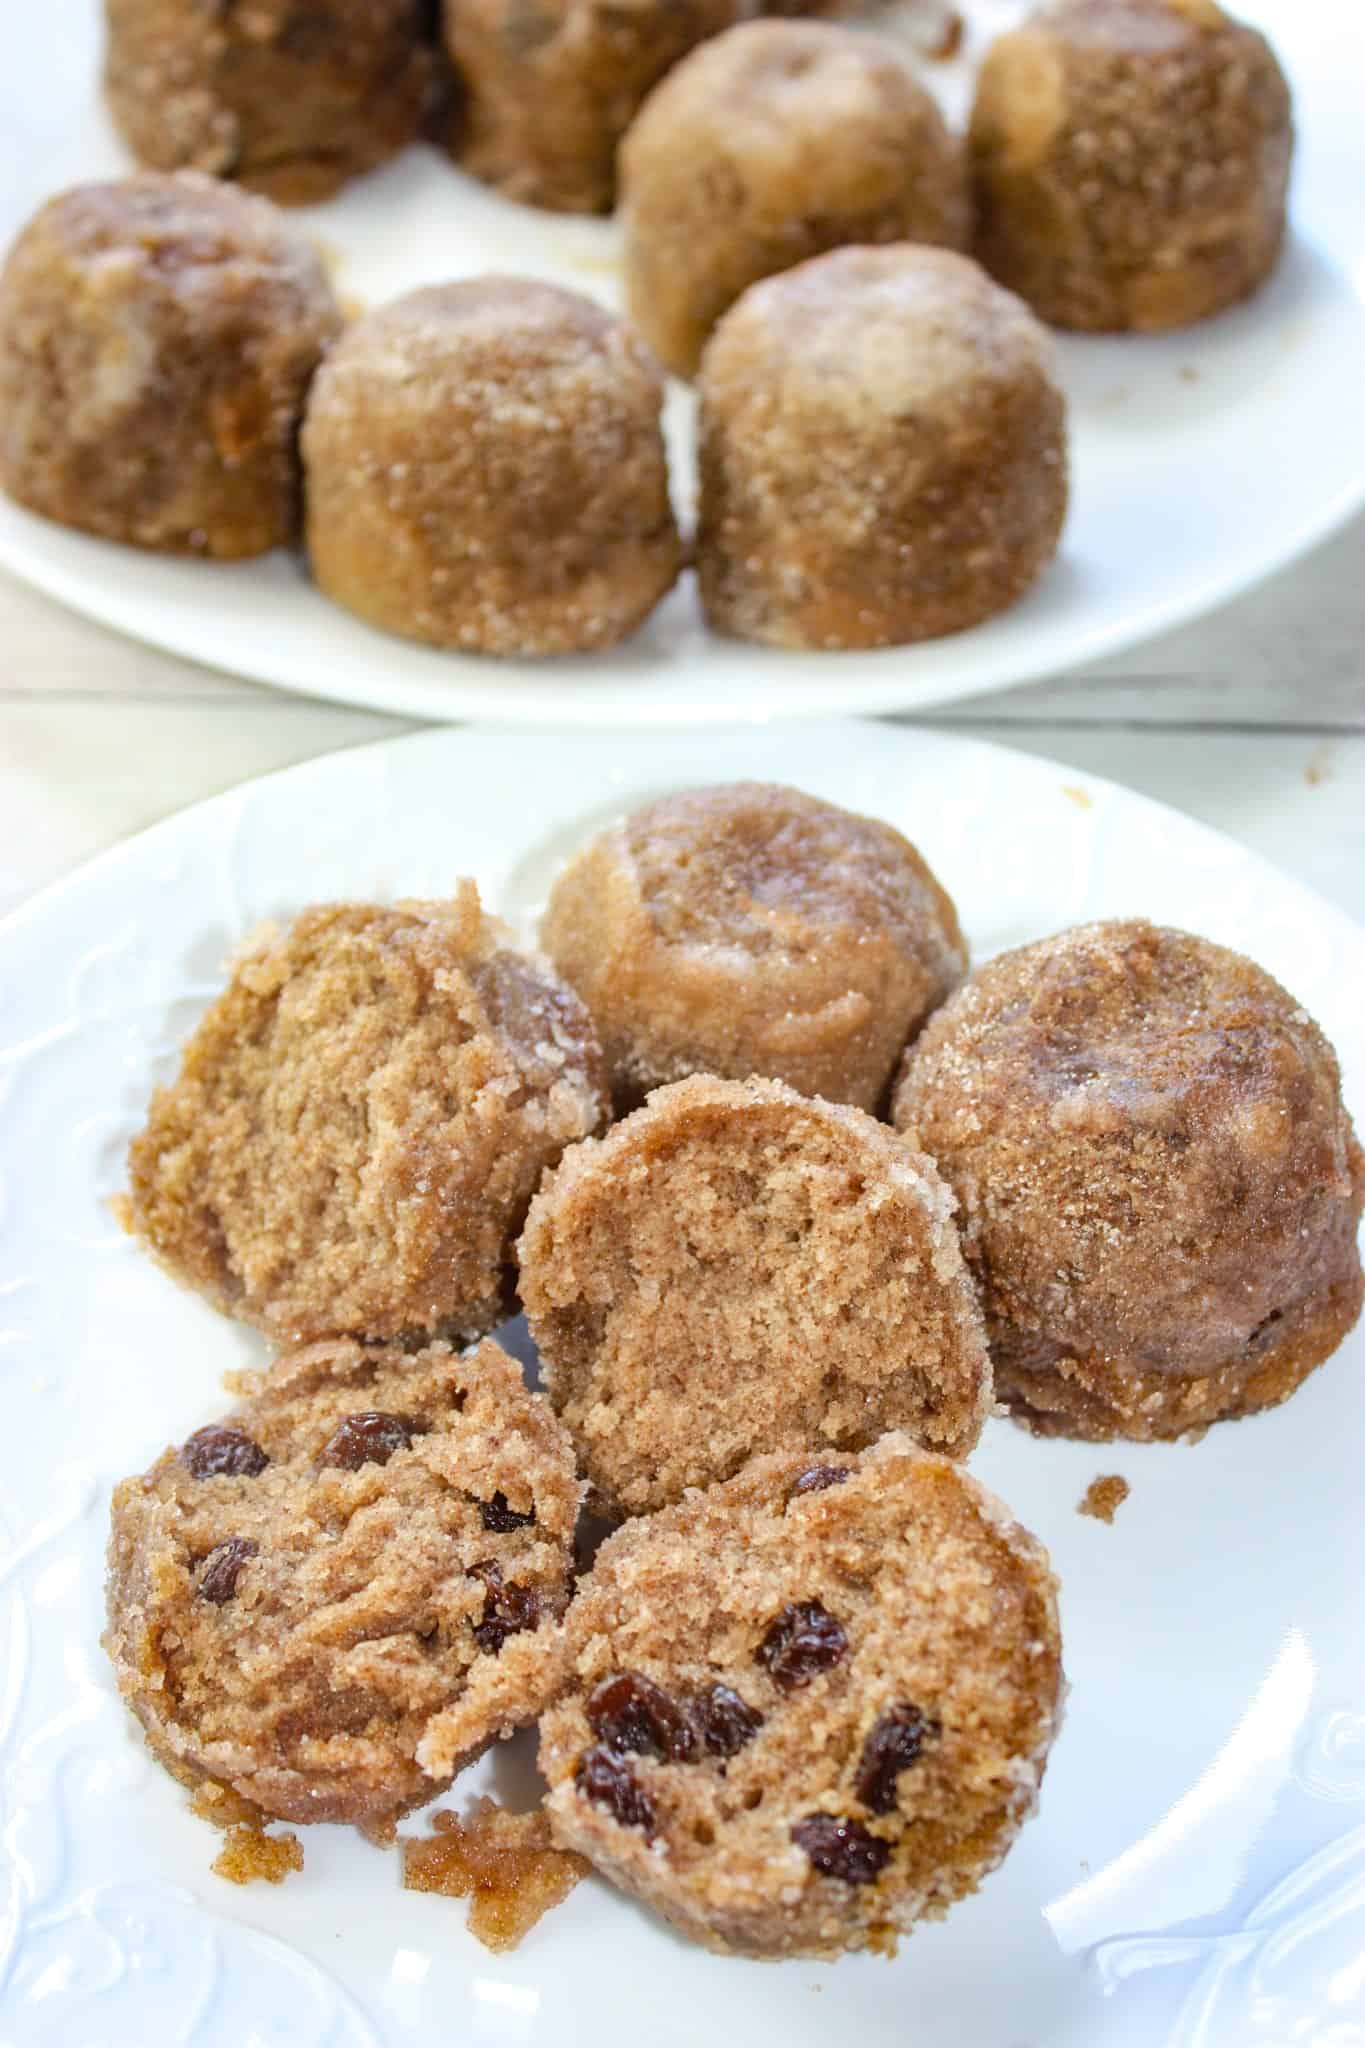 Instant Pot Glazed Cinnamon Bites are a little taste of heaven.  They are one of the best gluten free treats I have tasted!  These easy pressure cooker morsels  loaded with cinnamon, and raisins if you like, are moist and delicious.